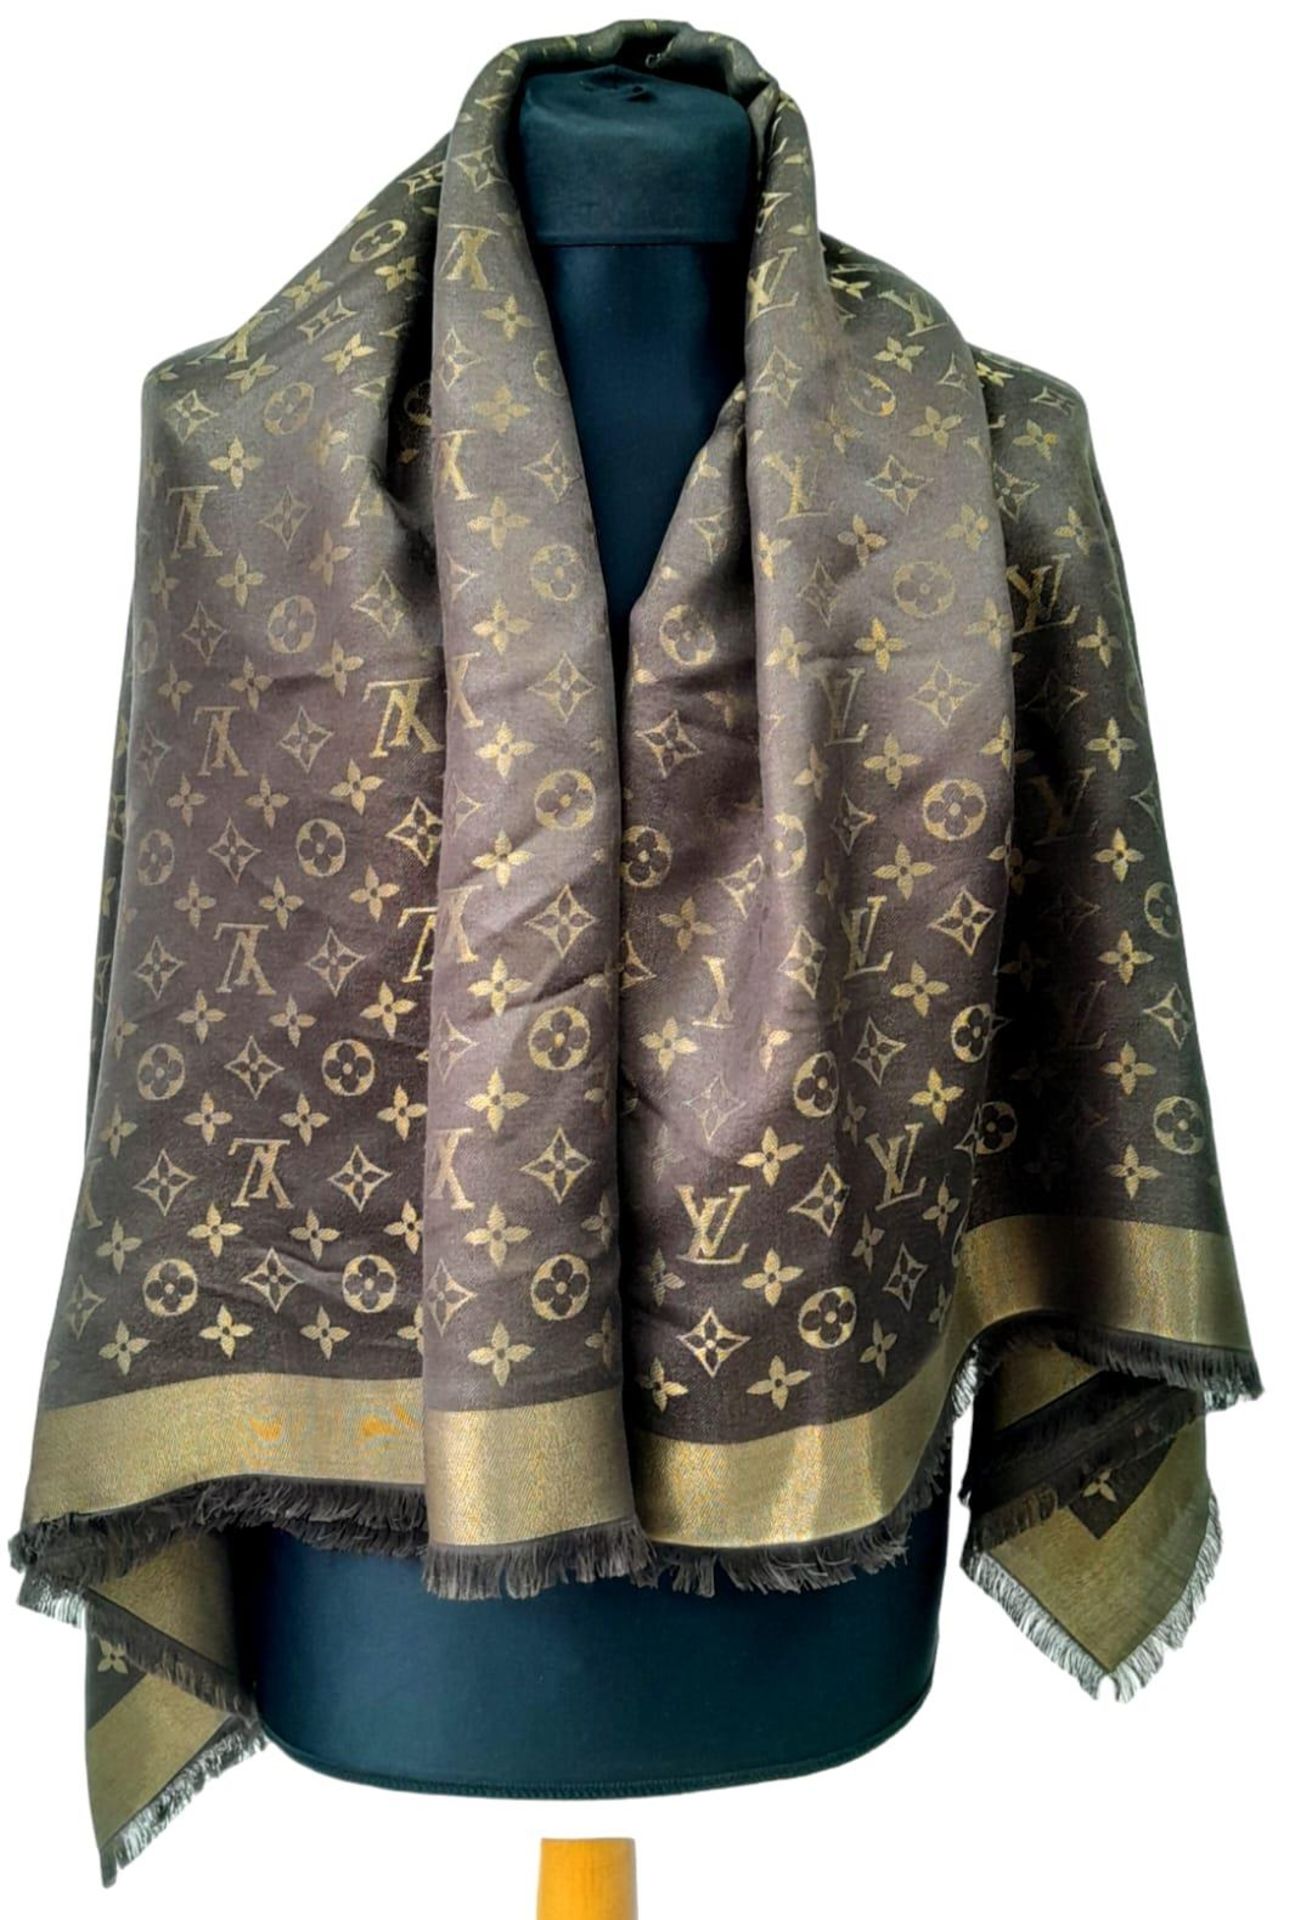 A Louis Vuitton Châle Monogram Shine Silk Scarf. Comes with purchase receipt. Approximately 140cm - Image 2 of 6